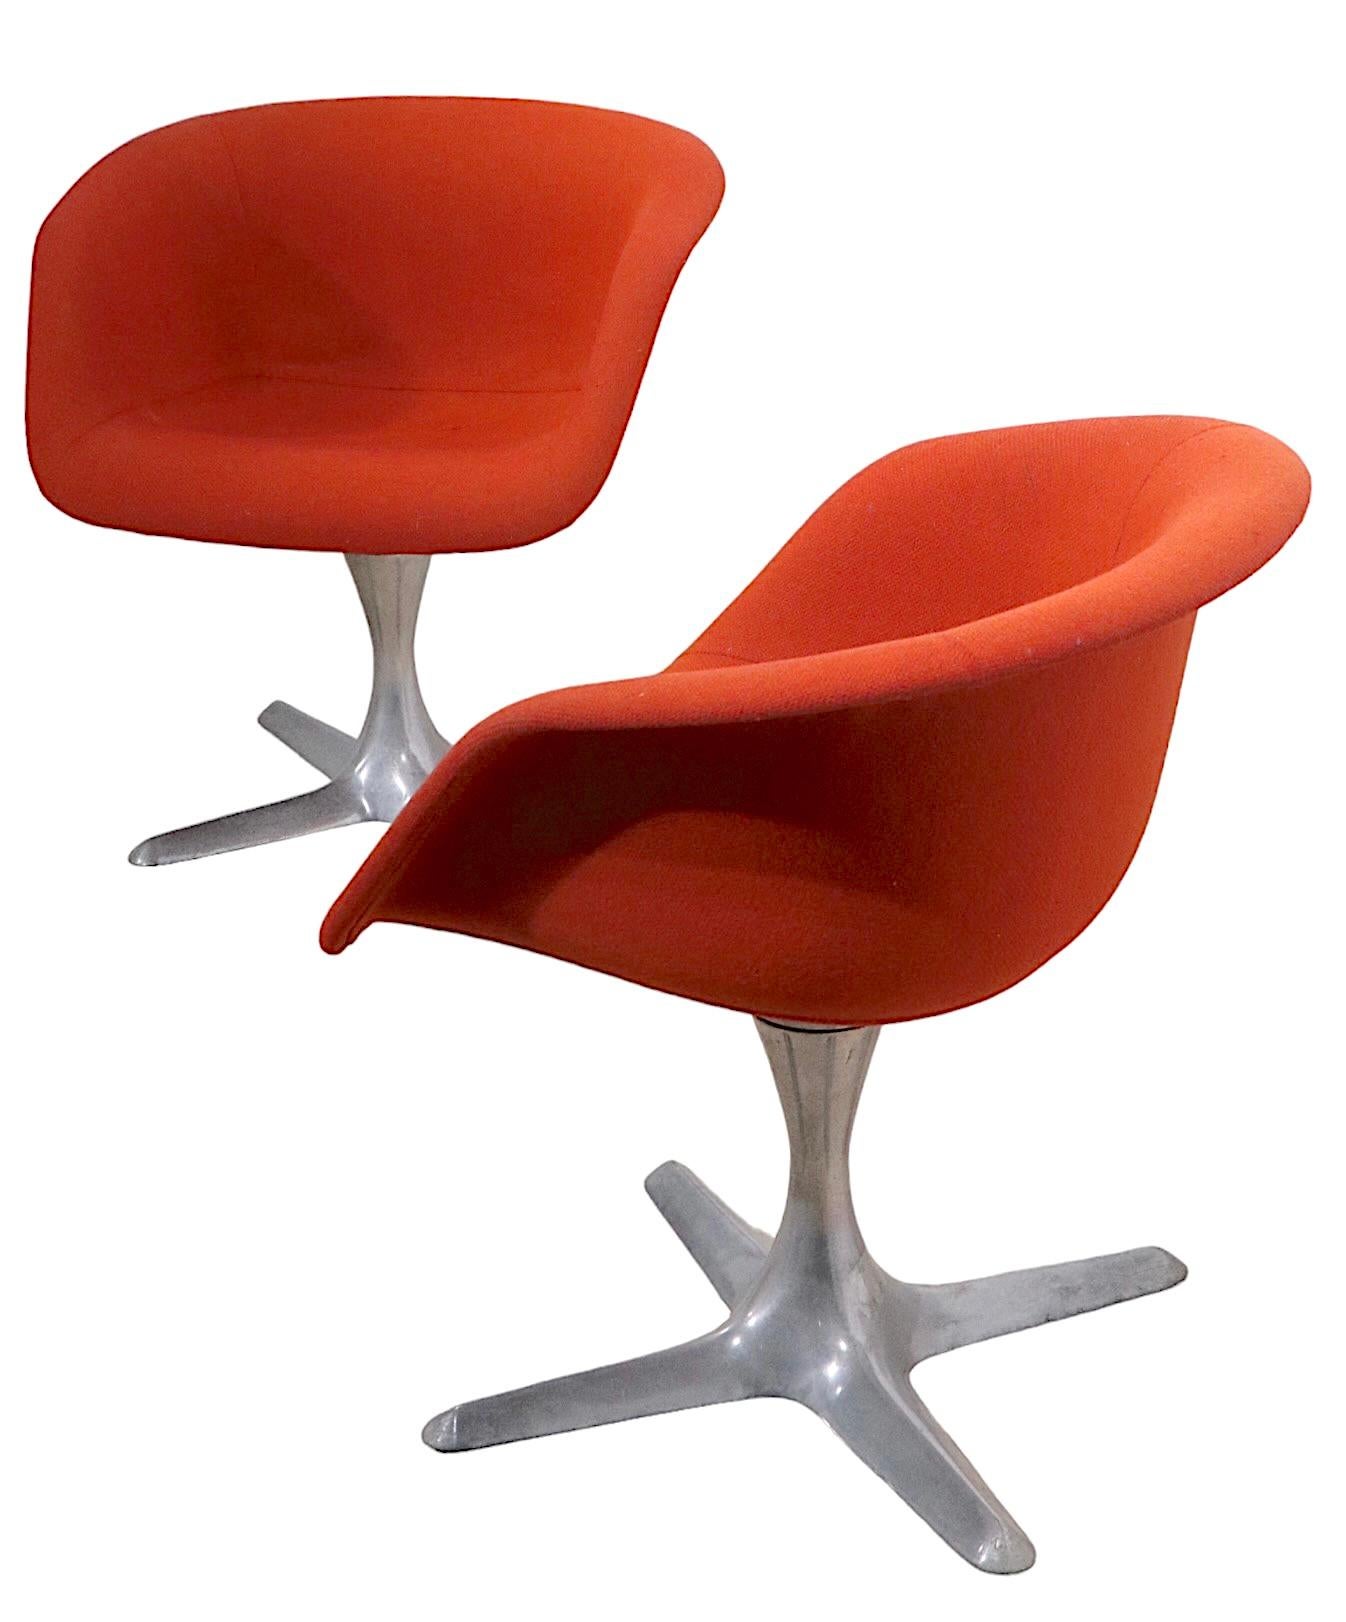 20th Century Pr. Swivel Chairs by Hugh Acton for Burke Acton, circa 1960s For Sale